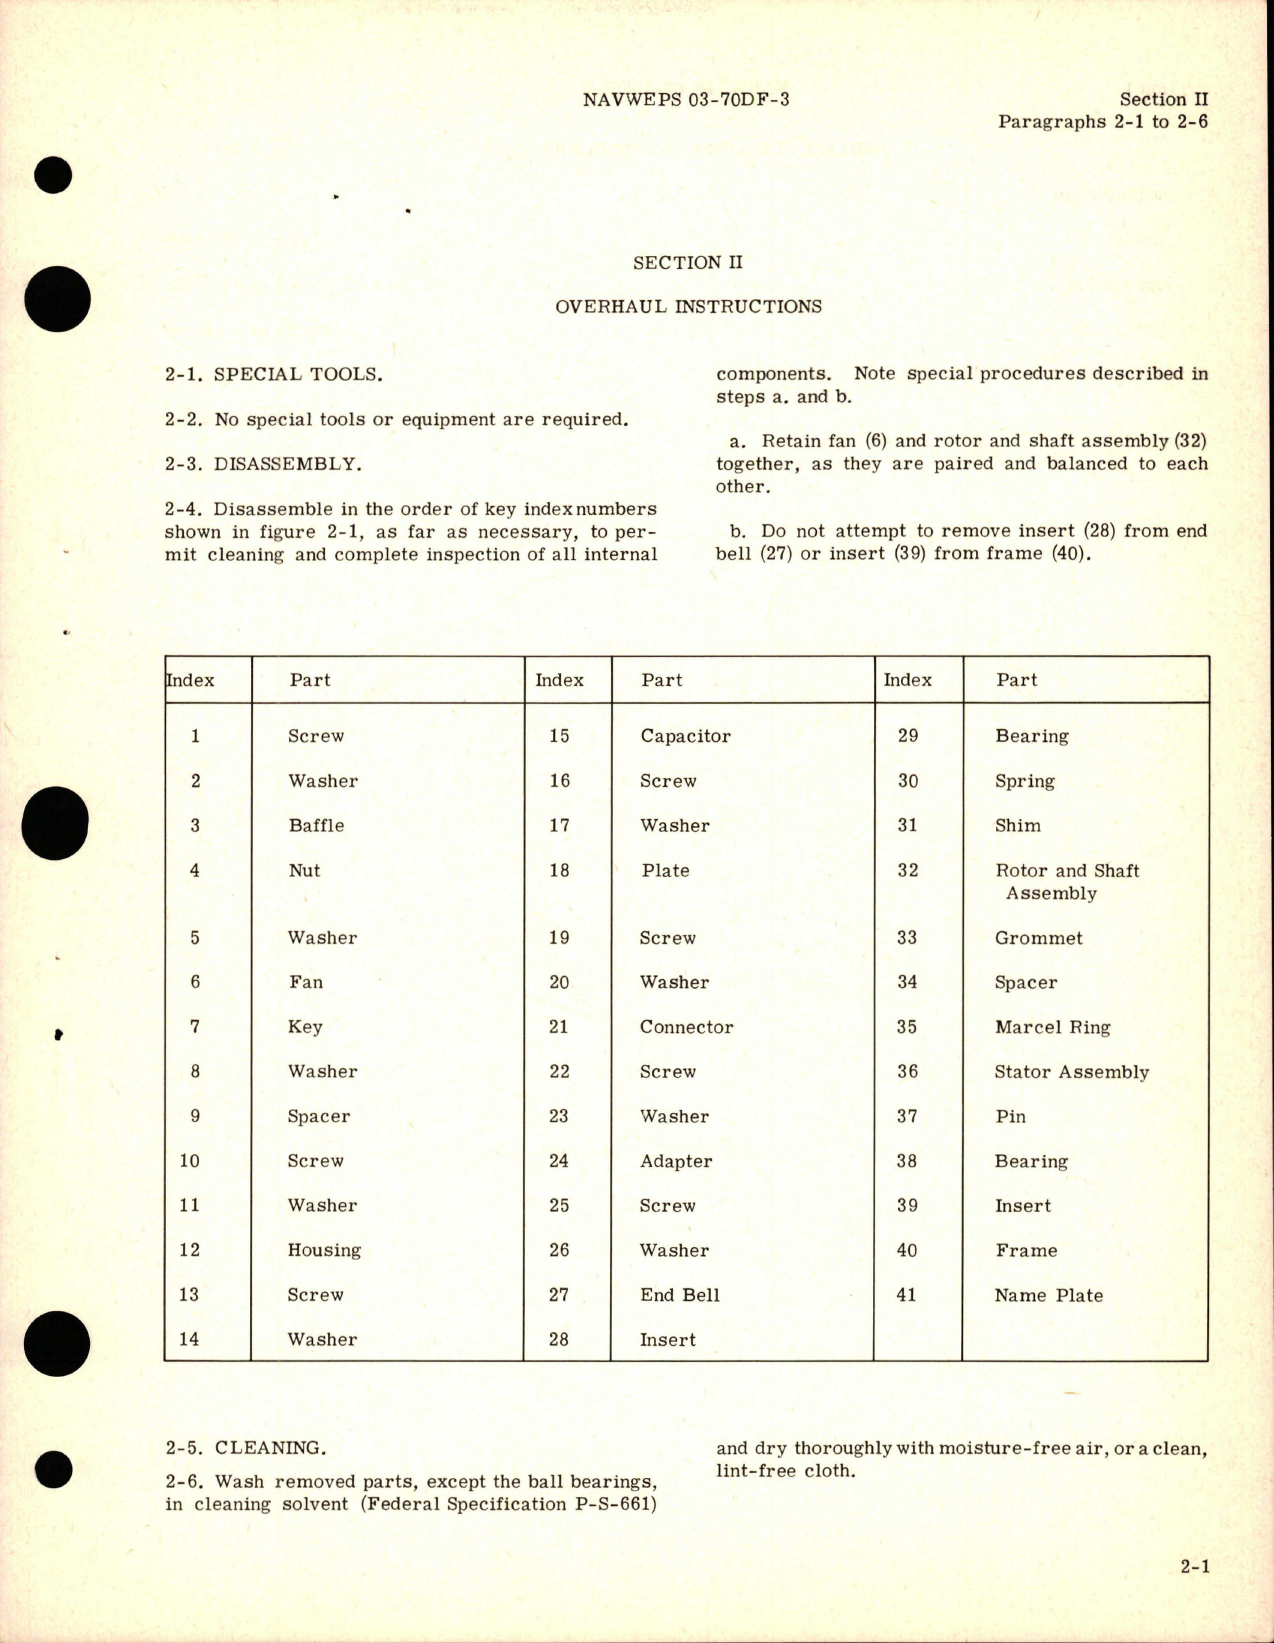 Sample page 5 from AirCorps Library document: Overhaul Instructions for Cabin Air Blower Electric Motor Drive - Part 8401 